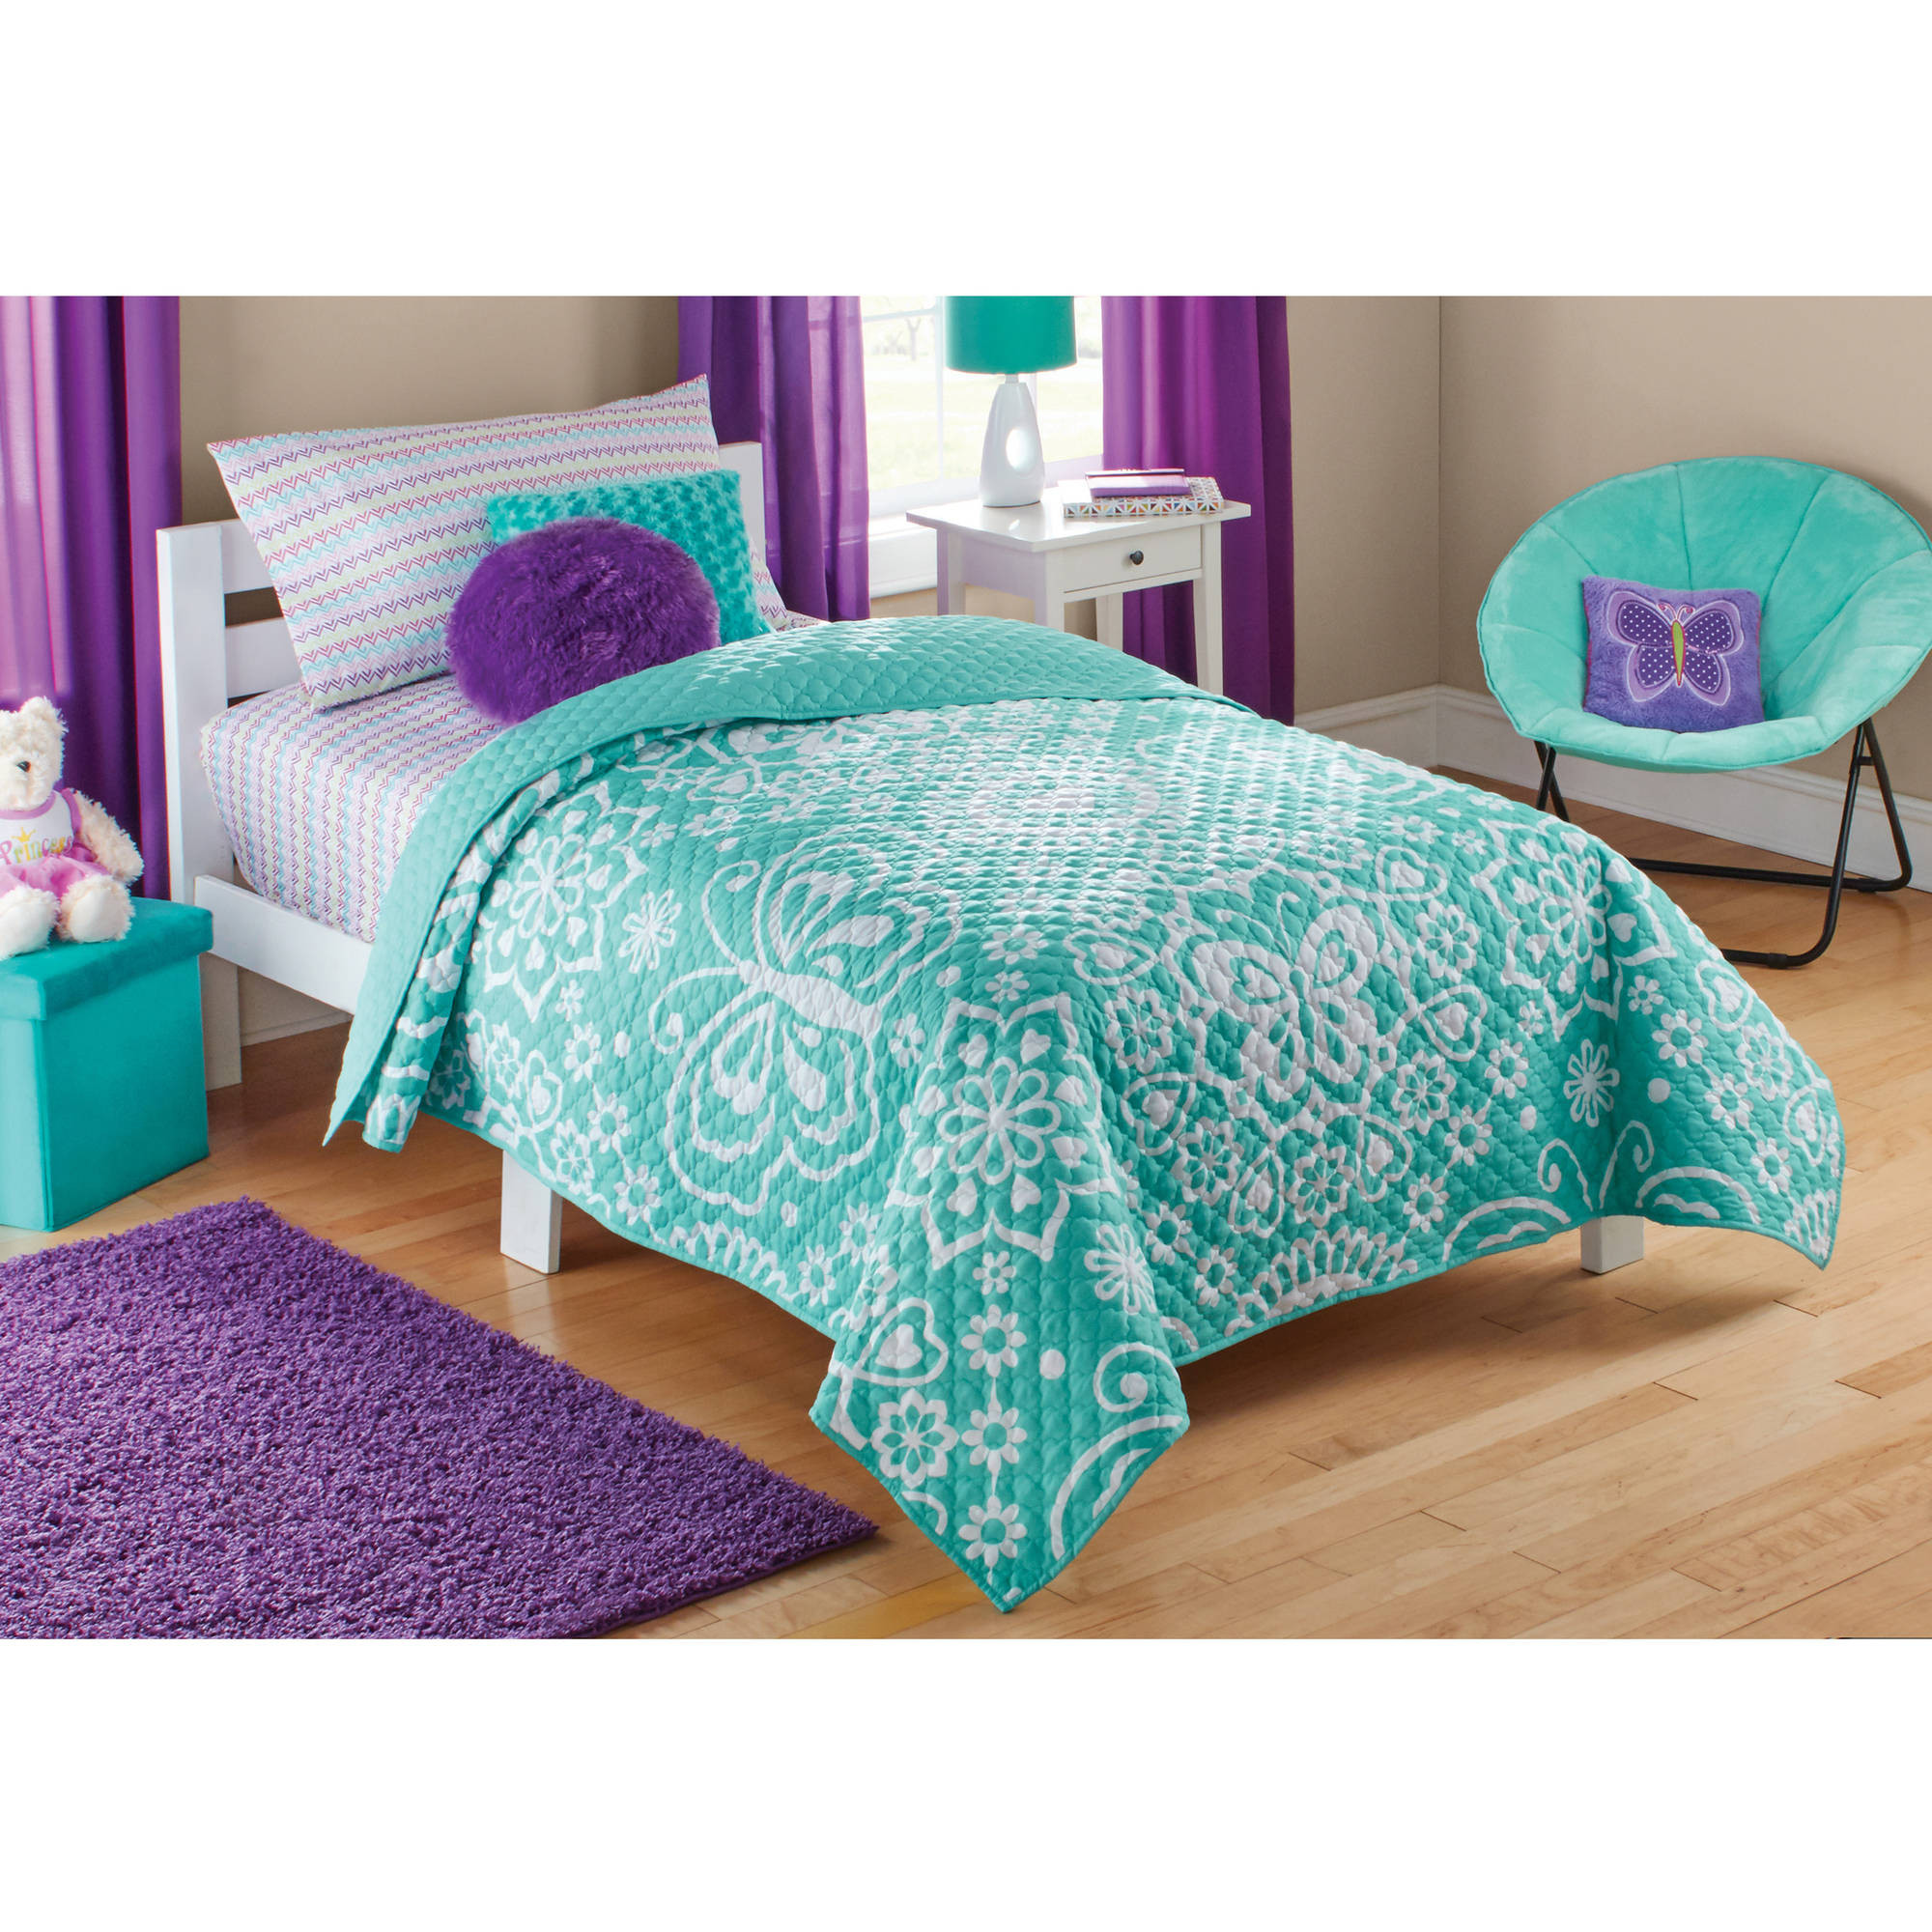 Walmart Bedroom Sets For Kids
 Mainstays Kids Purple Butterfly Coordinated Bed in a Bag